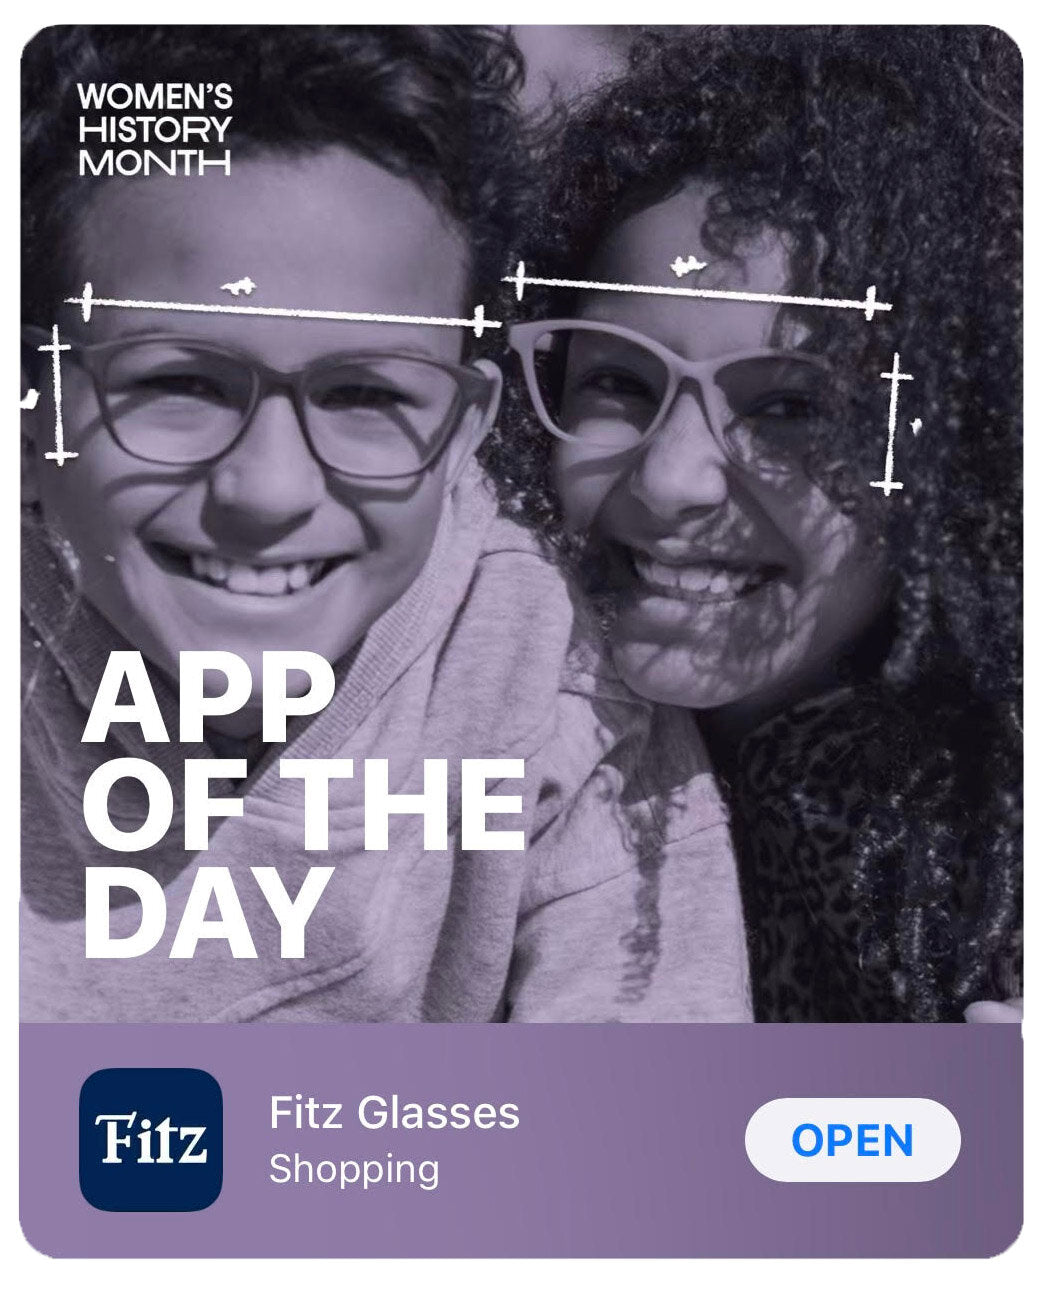 Fitz is Apple's App of the Day!!!